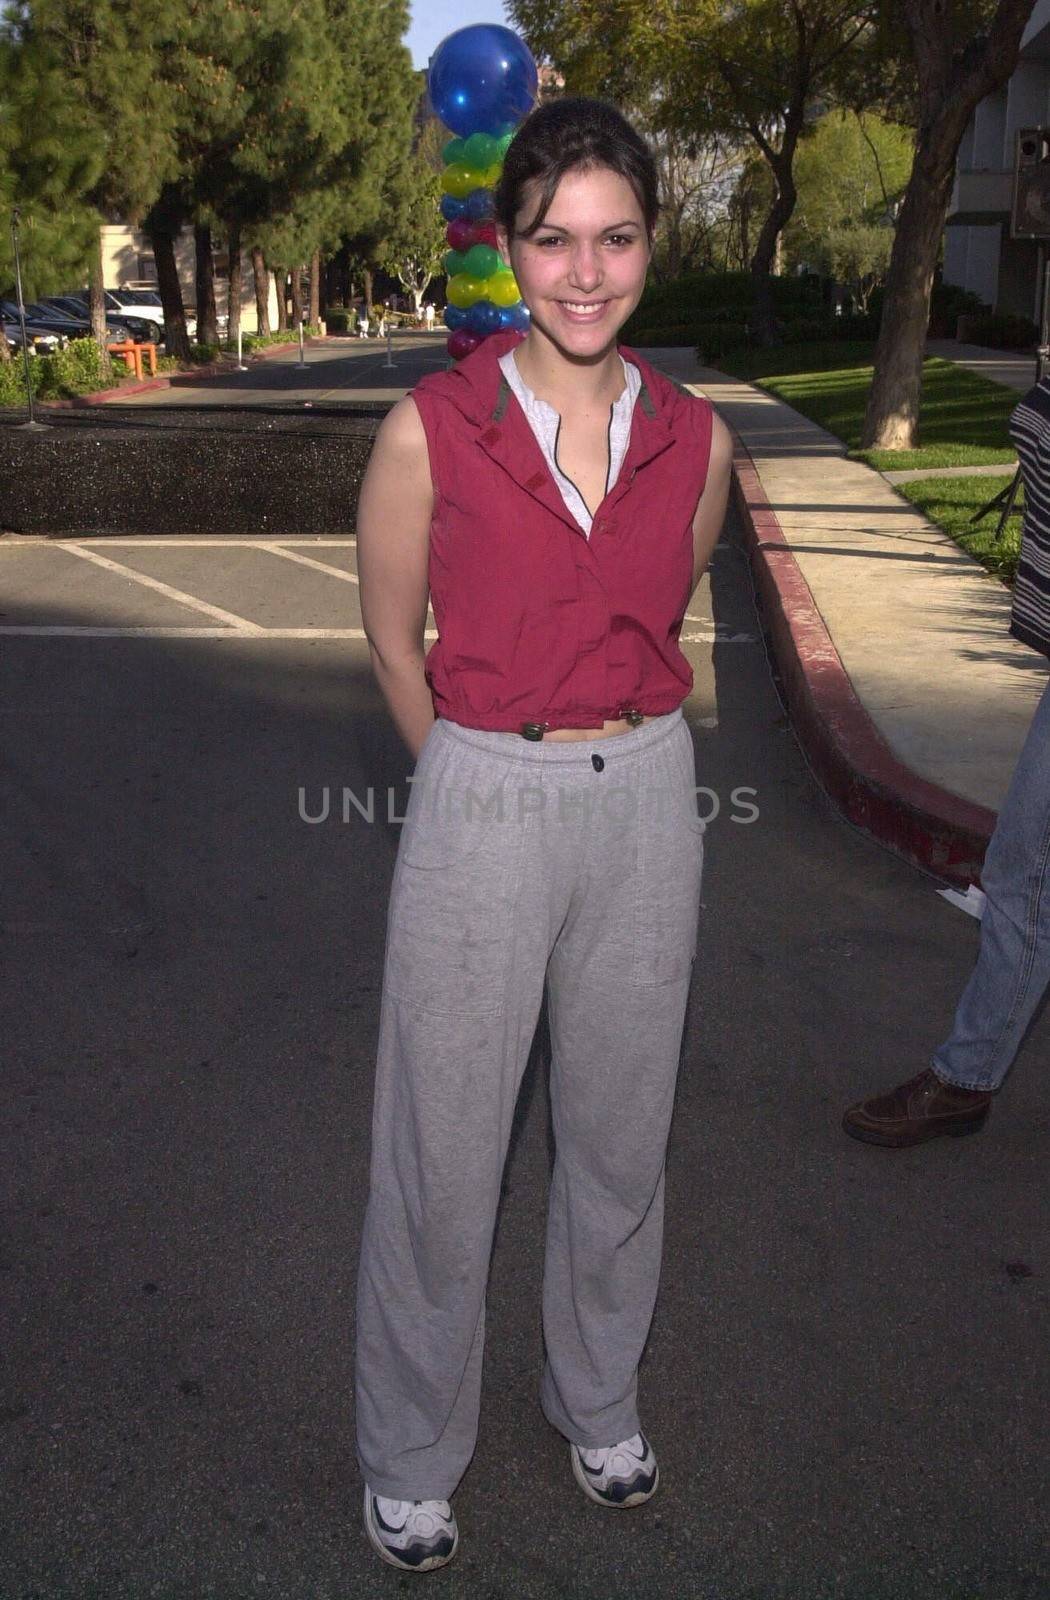 Sherri Rappaport at the MS Walk 2000, where the cast of "Laverne and Shirley" reunited. Burbank, 04-09-00